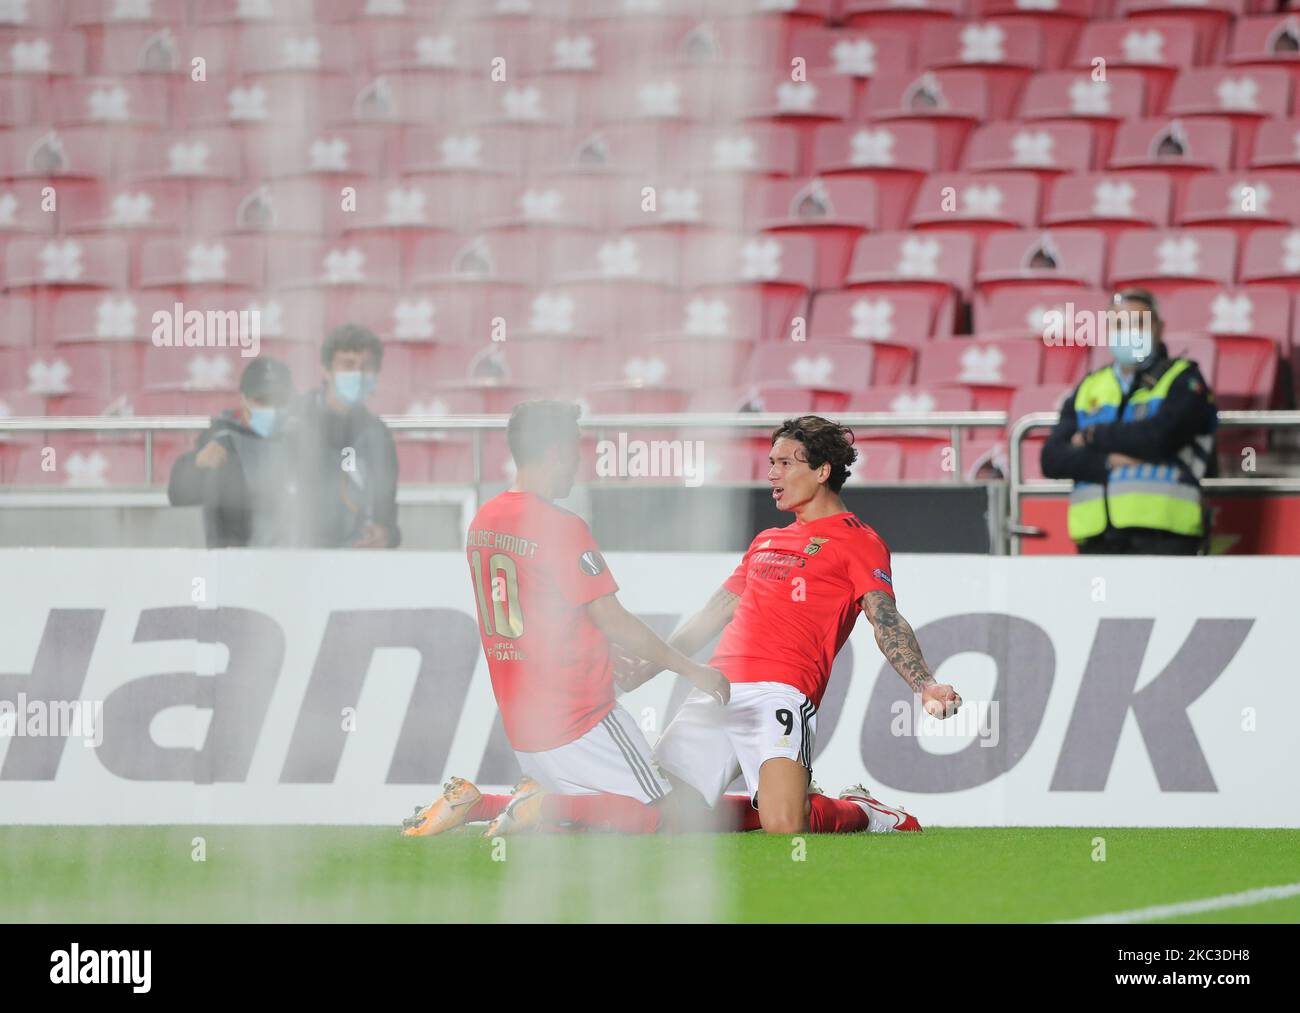 Darwin Nunez Luis of SL Benfica celebrates after scoring a goal during the UEFA Europa League Group D stage match between SL Benfica and Rangers FC at Estadio da Luz on November 5, 2020 in Lisbon, Portugal. (Photo by Paulo Nascimento/NurPhoto) Stock Photo